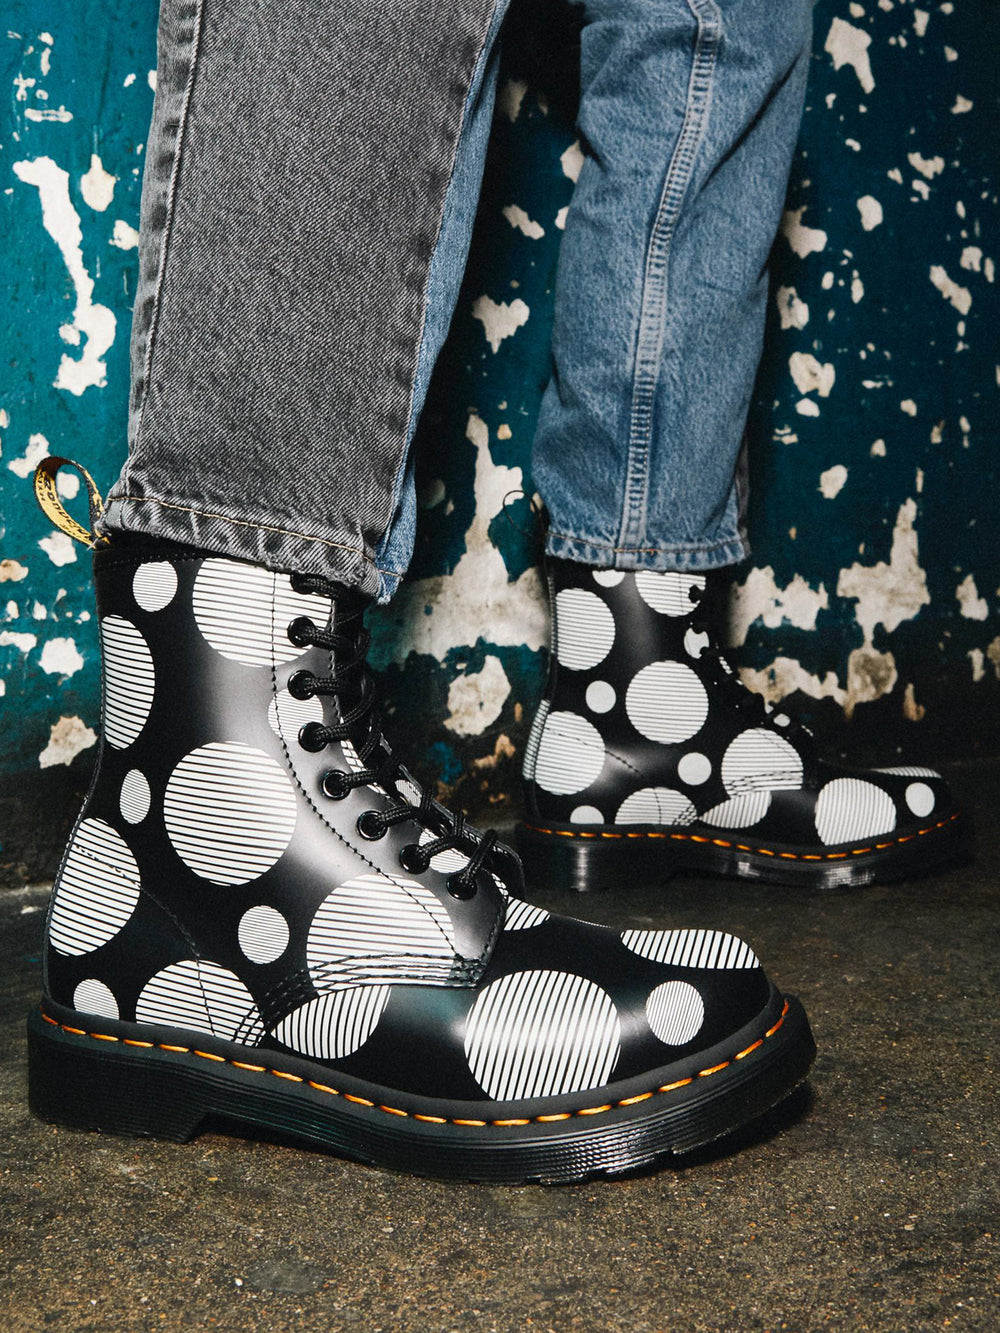 WOMENS DR MARTENS 1460 SMOOTH BOOT - CLEARANCE